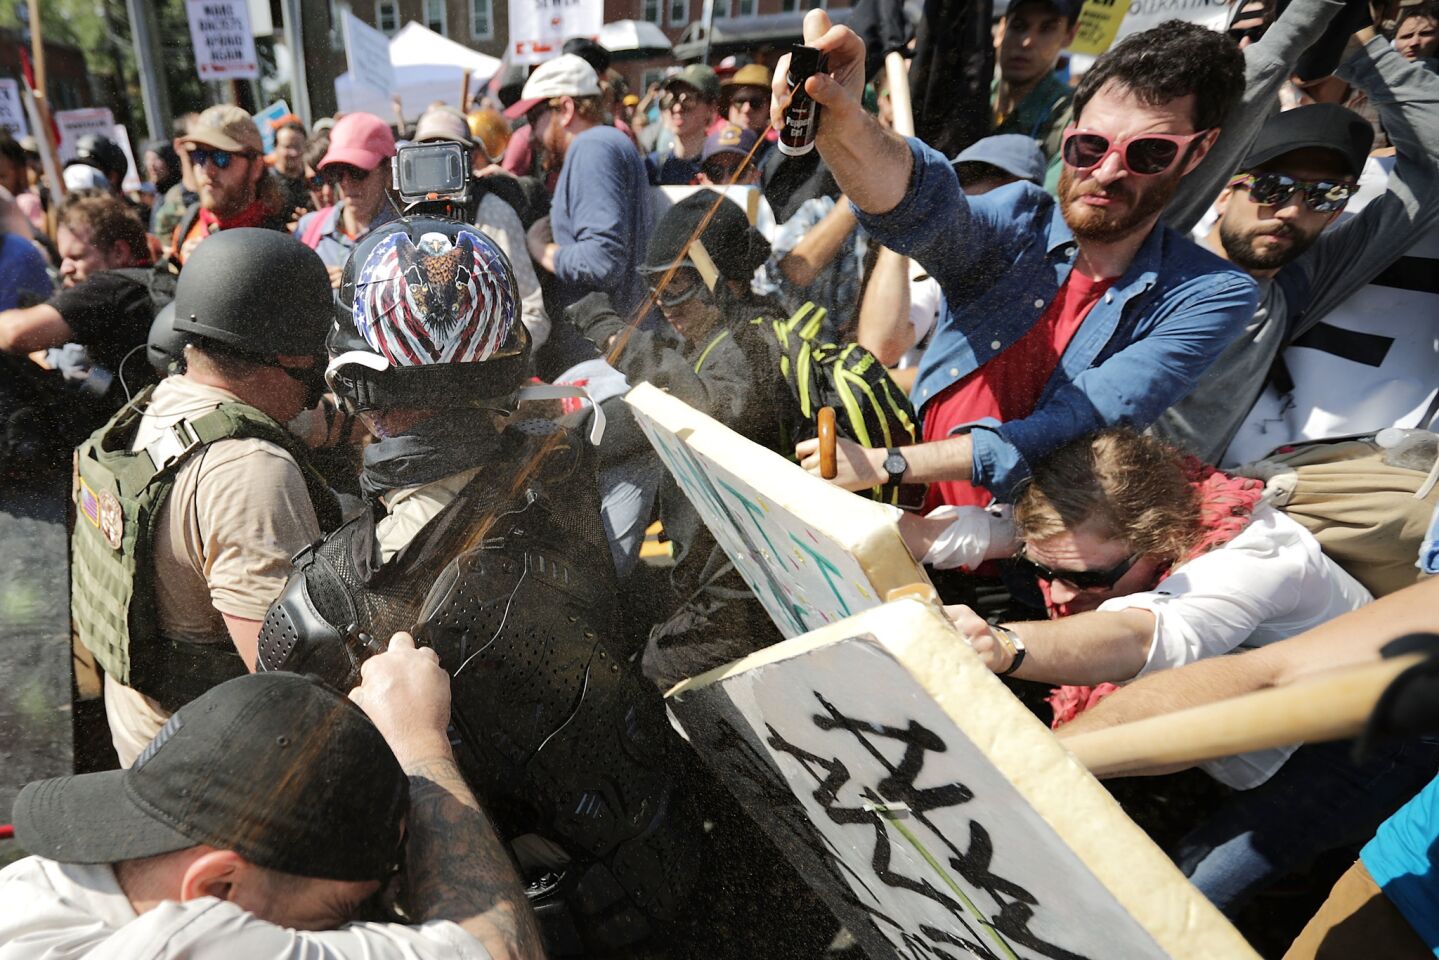 White nationalists, neo-Nazis and members of the "alt-right" clash with counter-protesters during a rally in Charlottesville, Va.